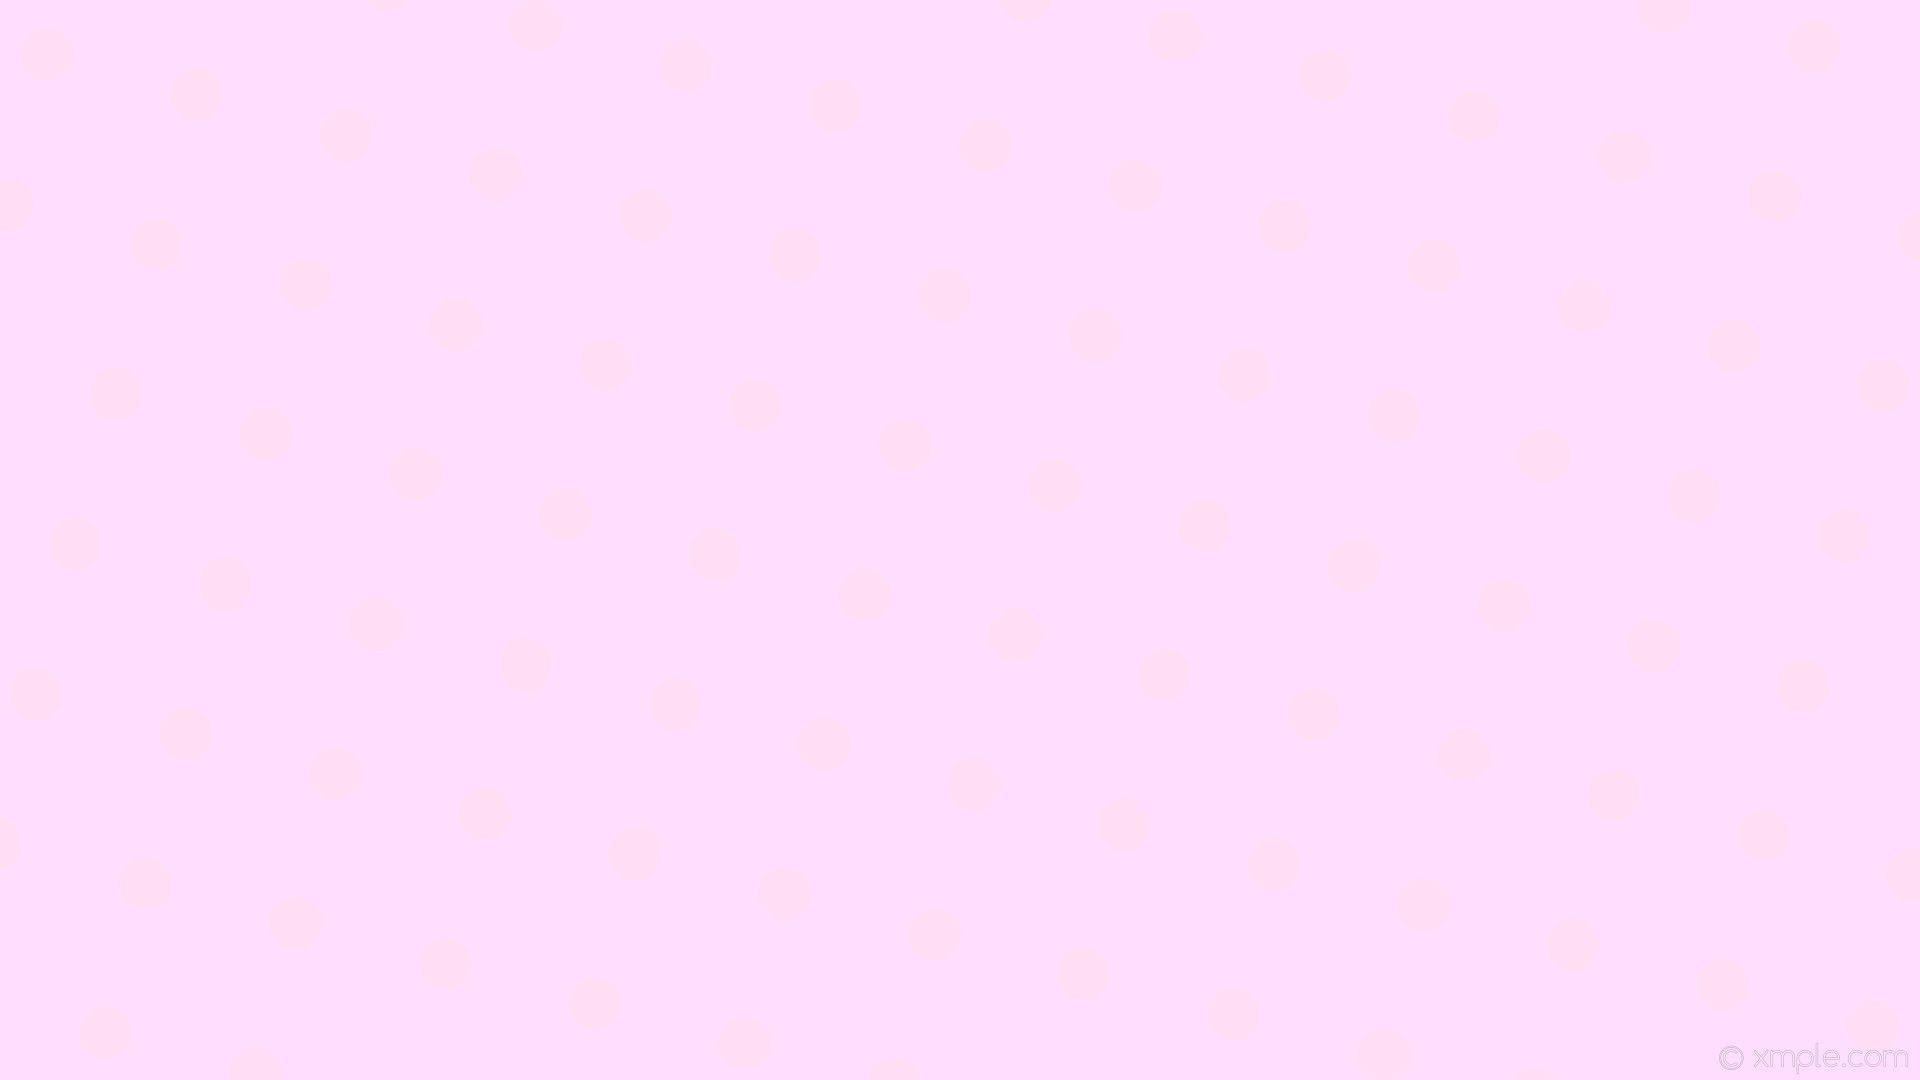 10 Most Popular Plain Light Pink Wallpaper FULL HD 1080p For PC Background  2018 free download light  Pink wallpaper Pink wallpaper desktop Plain  pink background